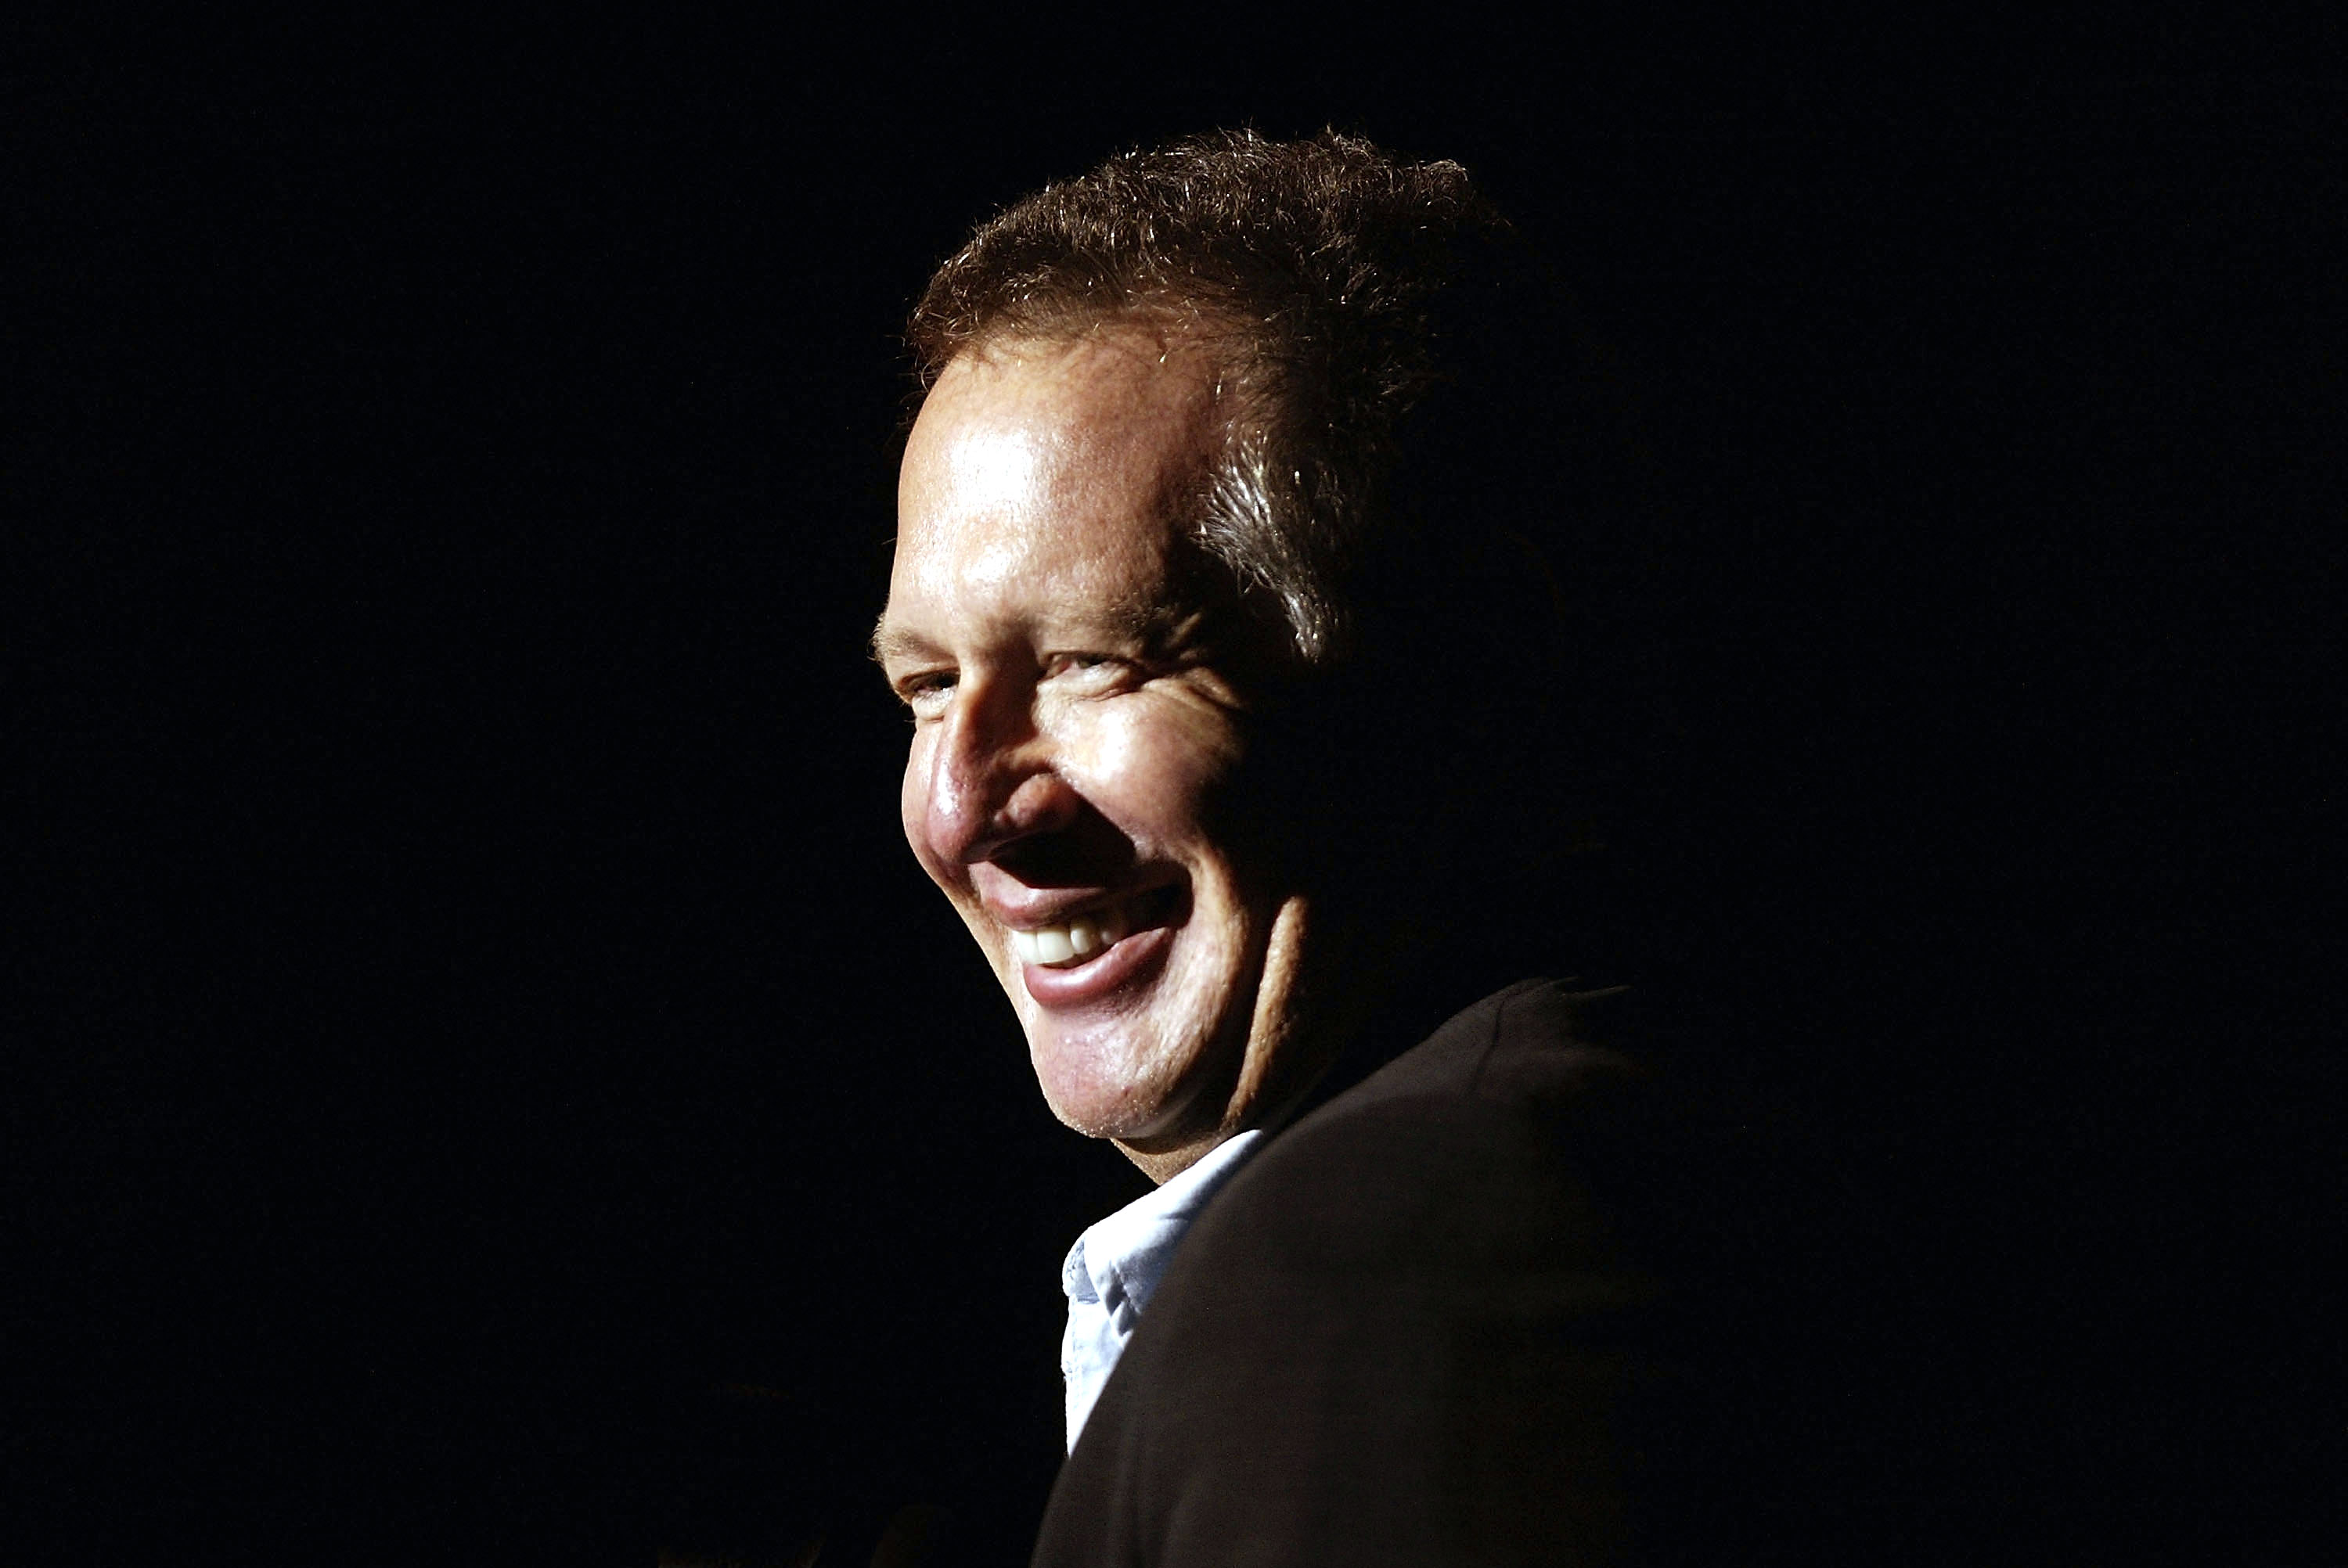 An Encounter With, and Appreciation of, Garry Shandling